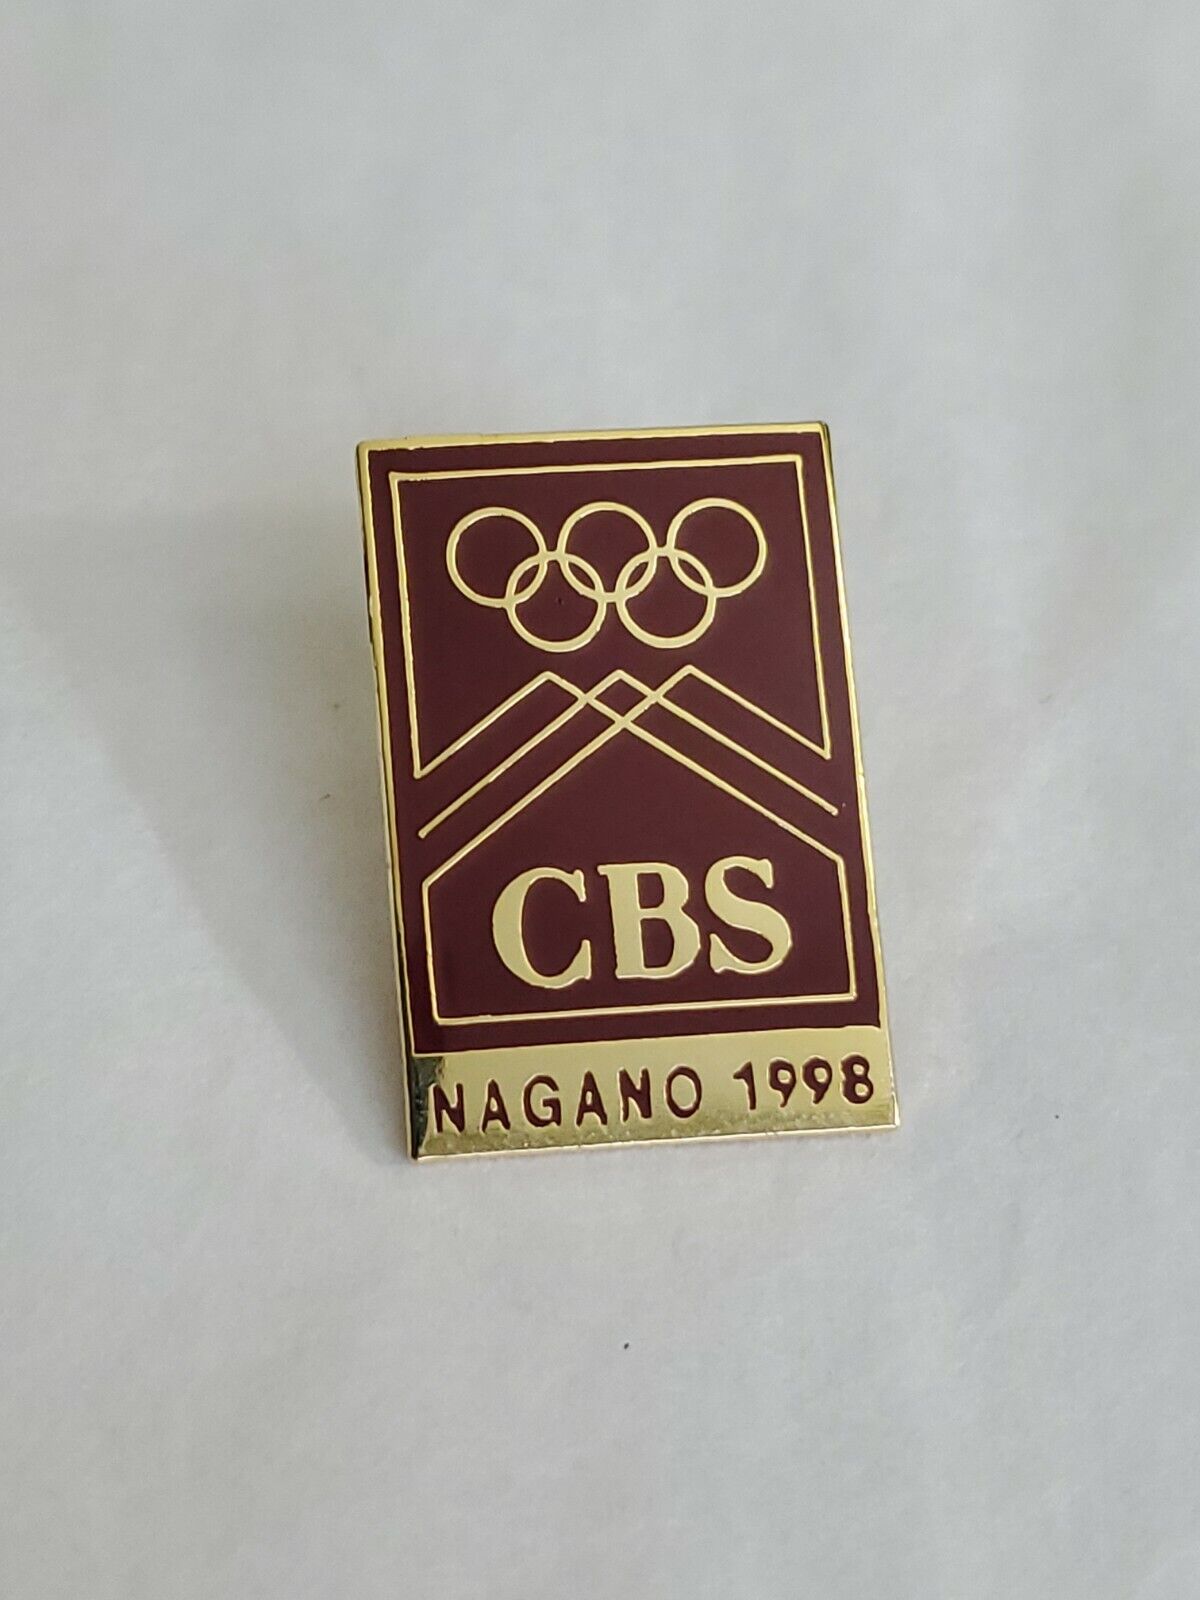 CBS Nagano 1998 Winter Olympic Games Souvenir Pin Maroon And Gold Colored